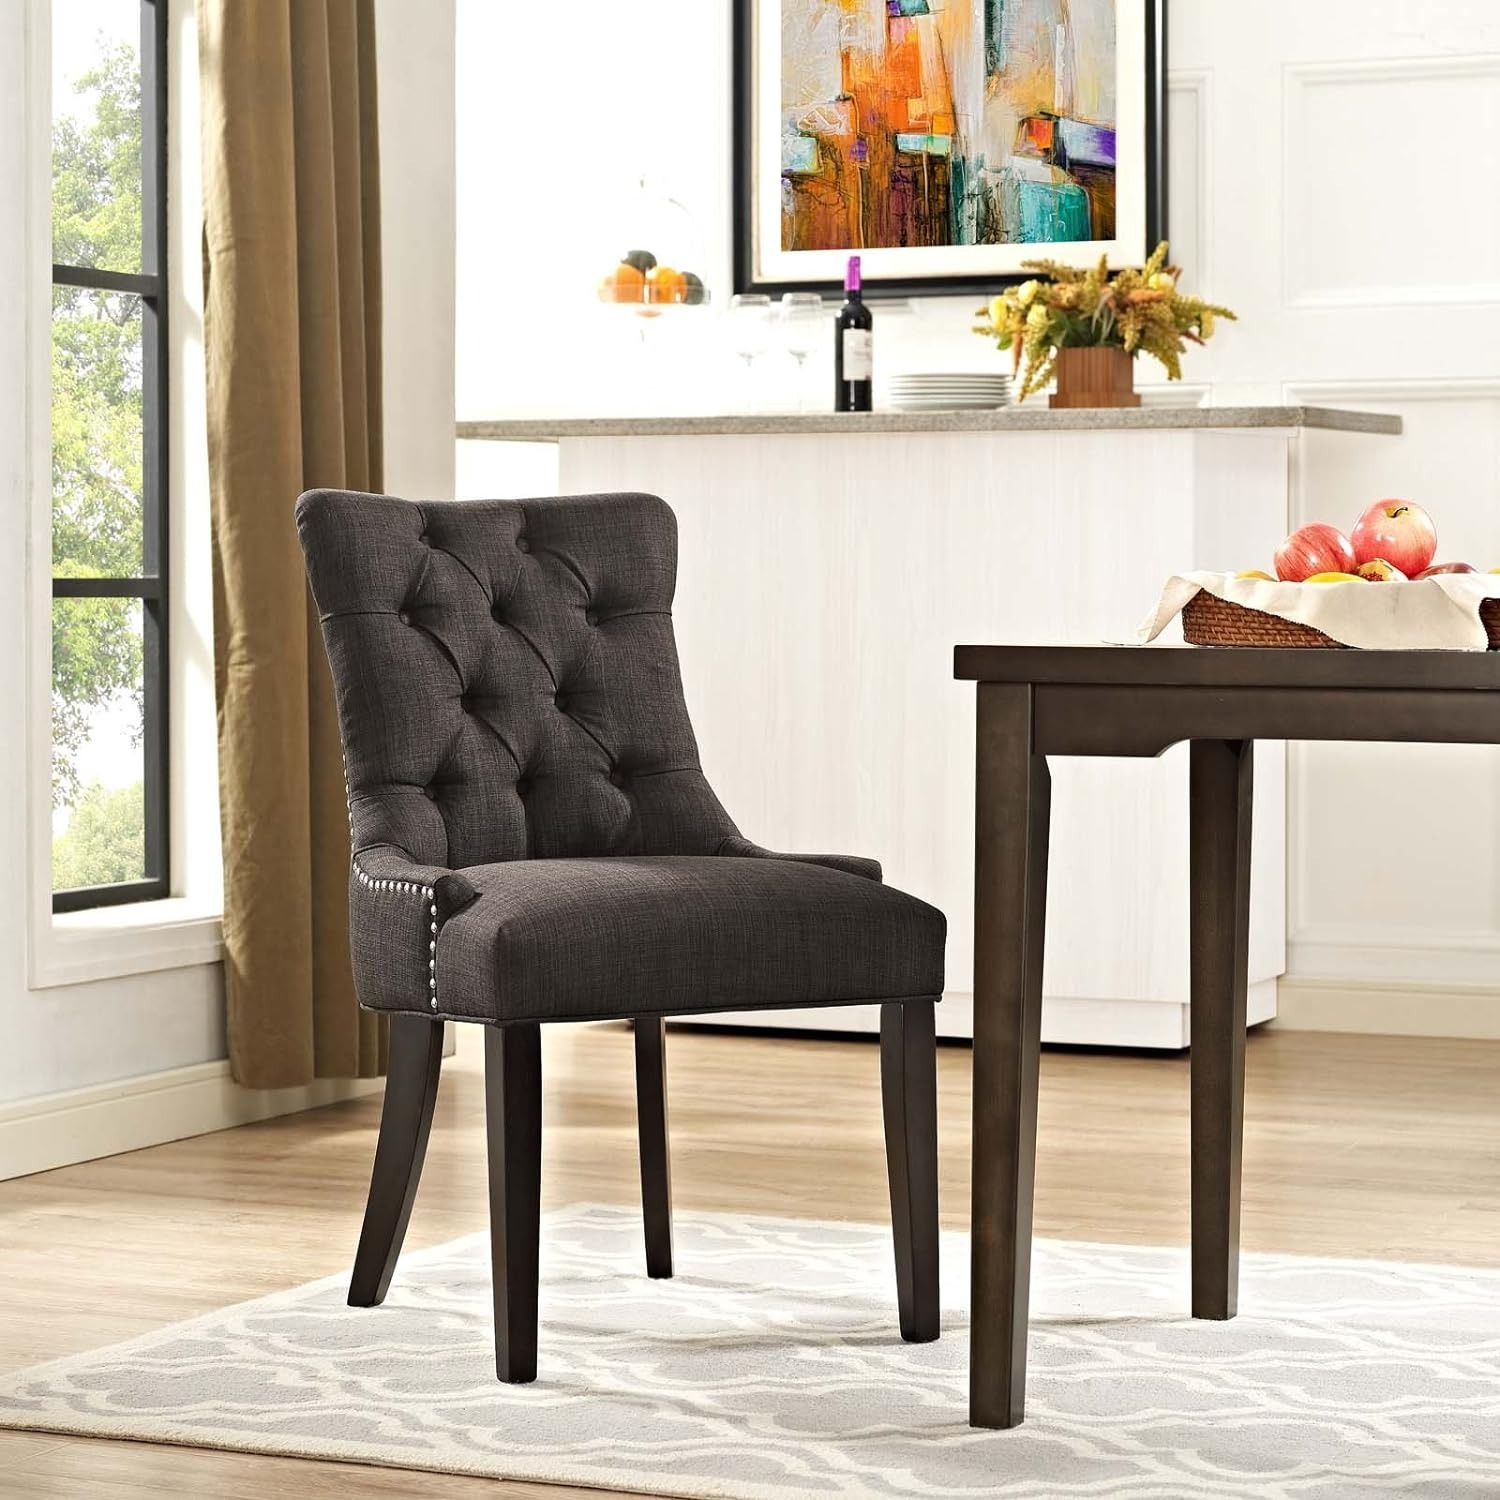 Modway Regent Button-Tufted Upholstered Fabric w/ Nailhead Trim Side Chair (Brown) $59 + Free Shipping